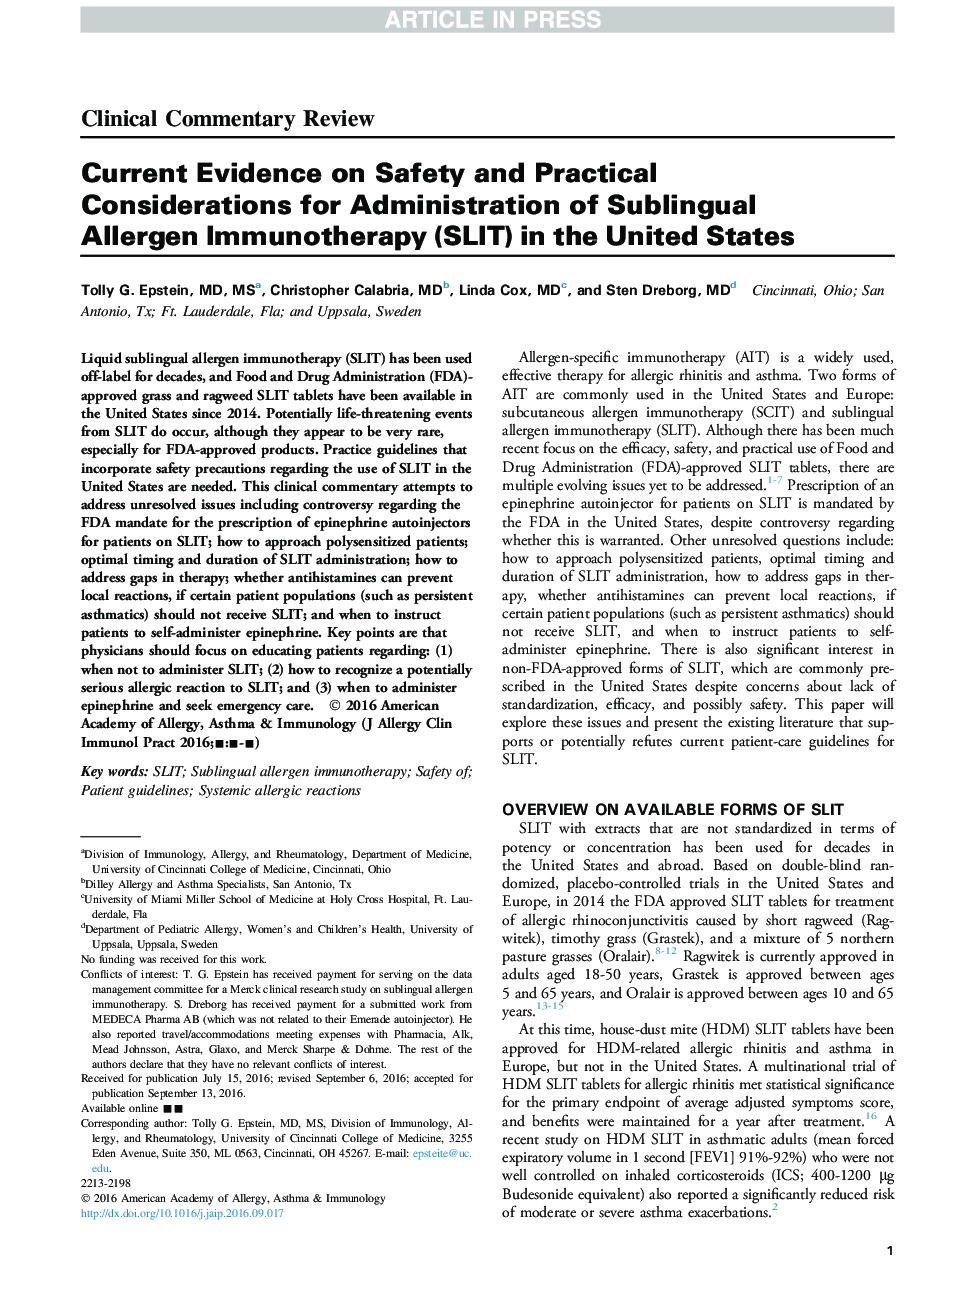 Current Evidence on Safety and Practical Considerations for Administration of Sublingual Allergen Immunotherapy (SLIT) in the United States